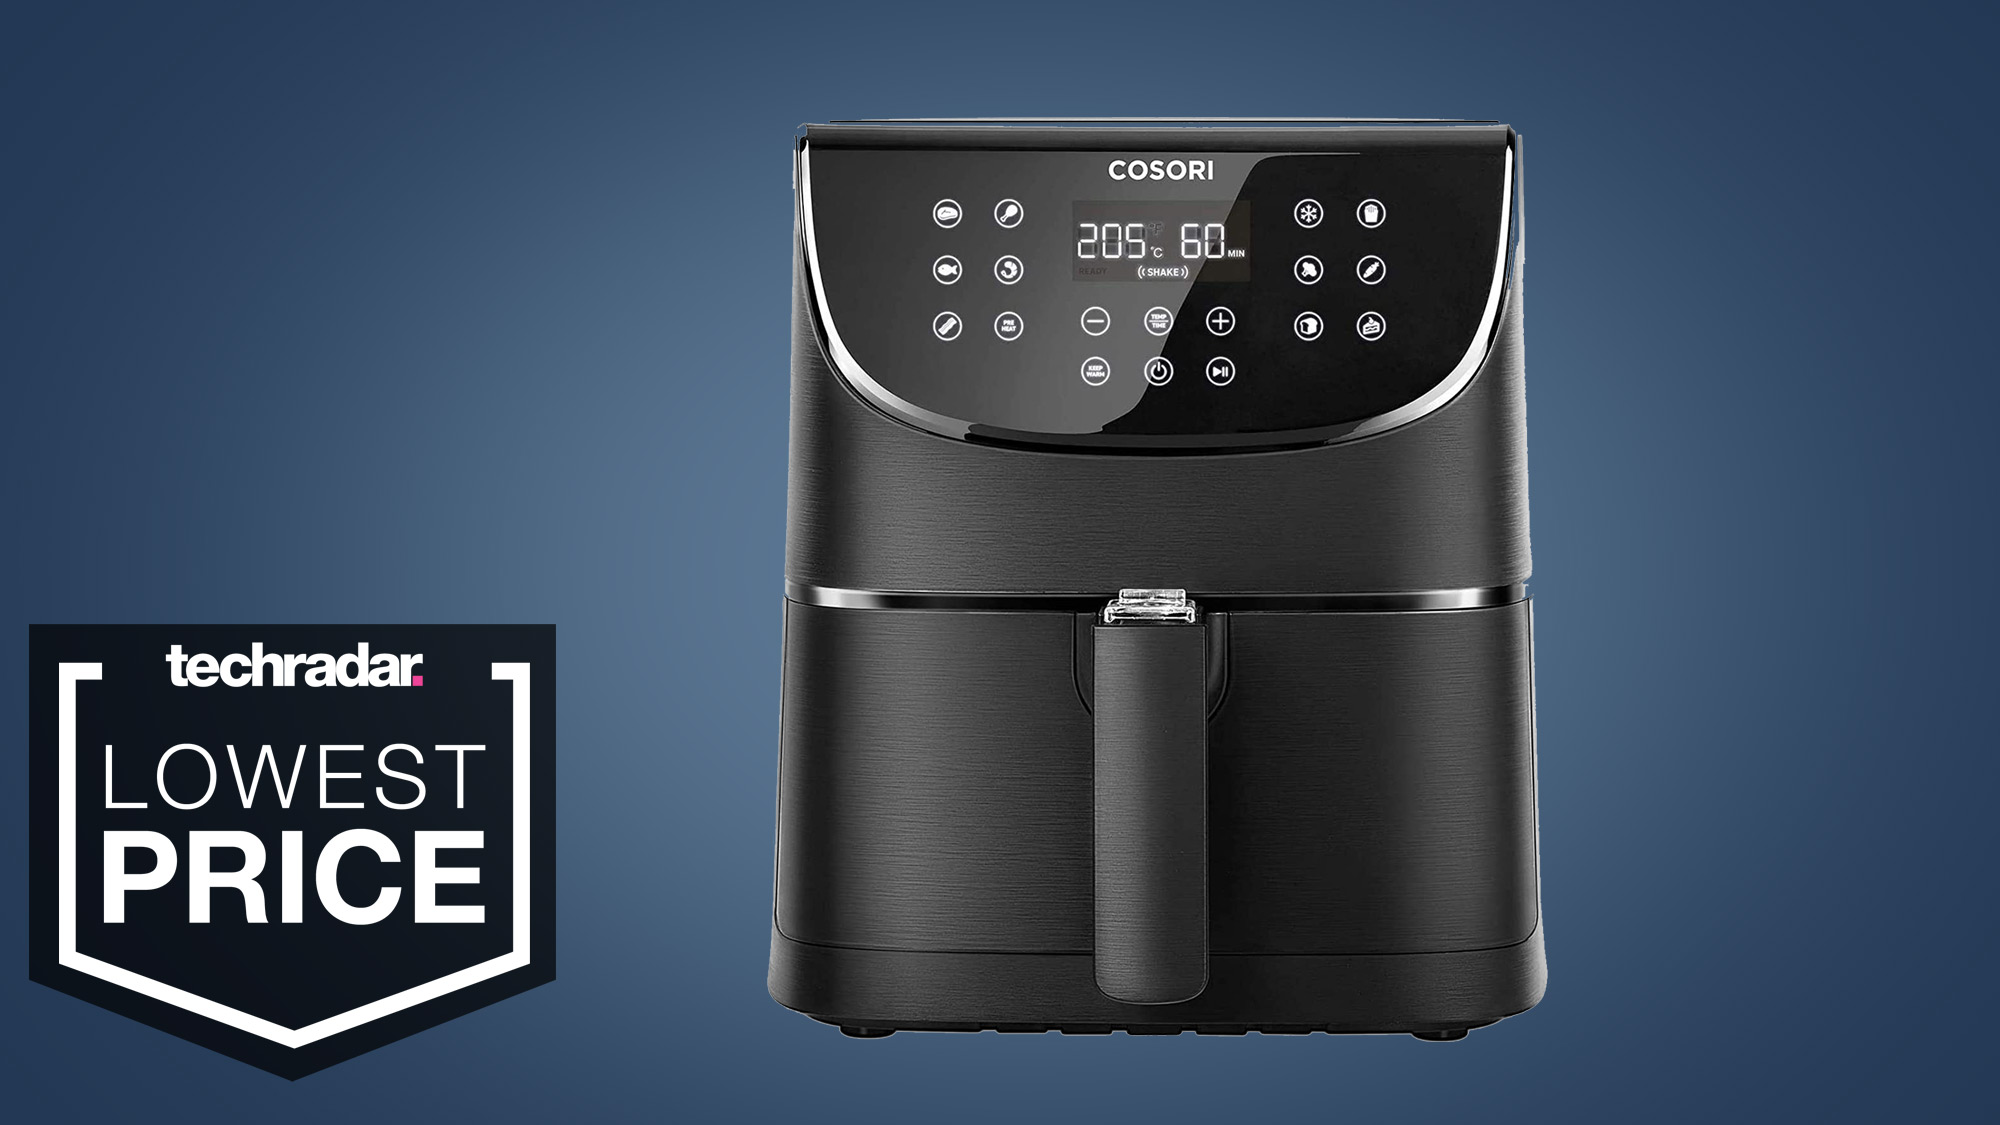 Best air fryer deal: The Cosori Pro is 15% off at